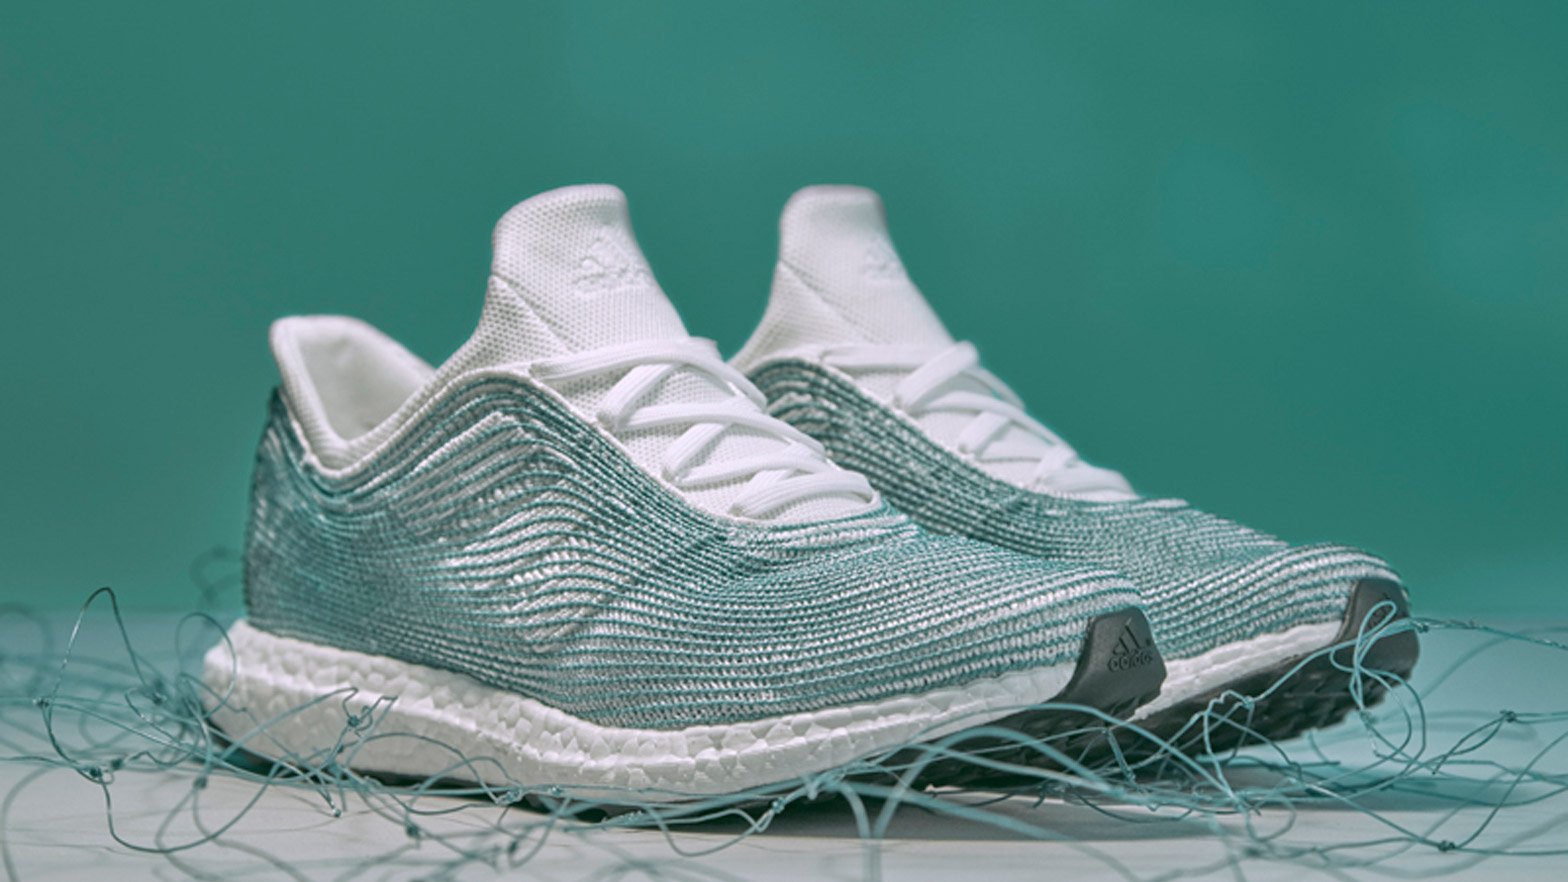 Adidas Parley made from recycled ocean plastic